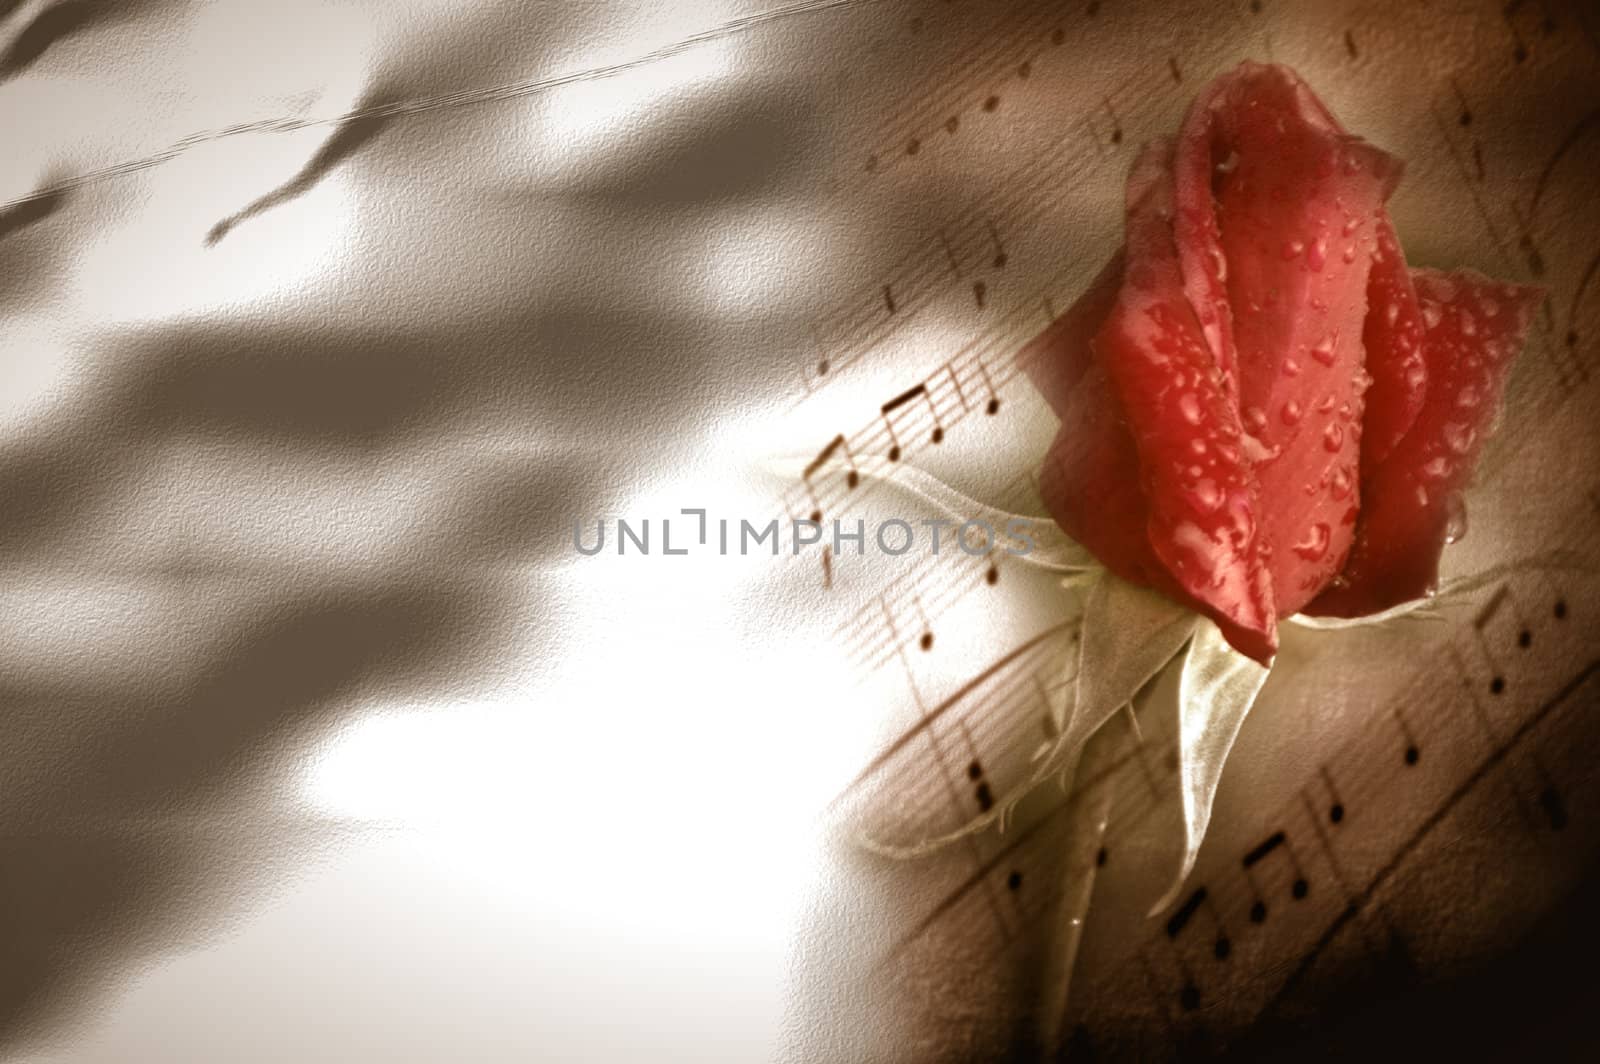 music and romance card red rose bud  by Carche